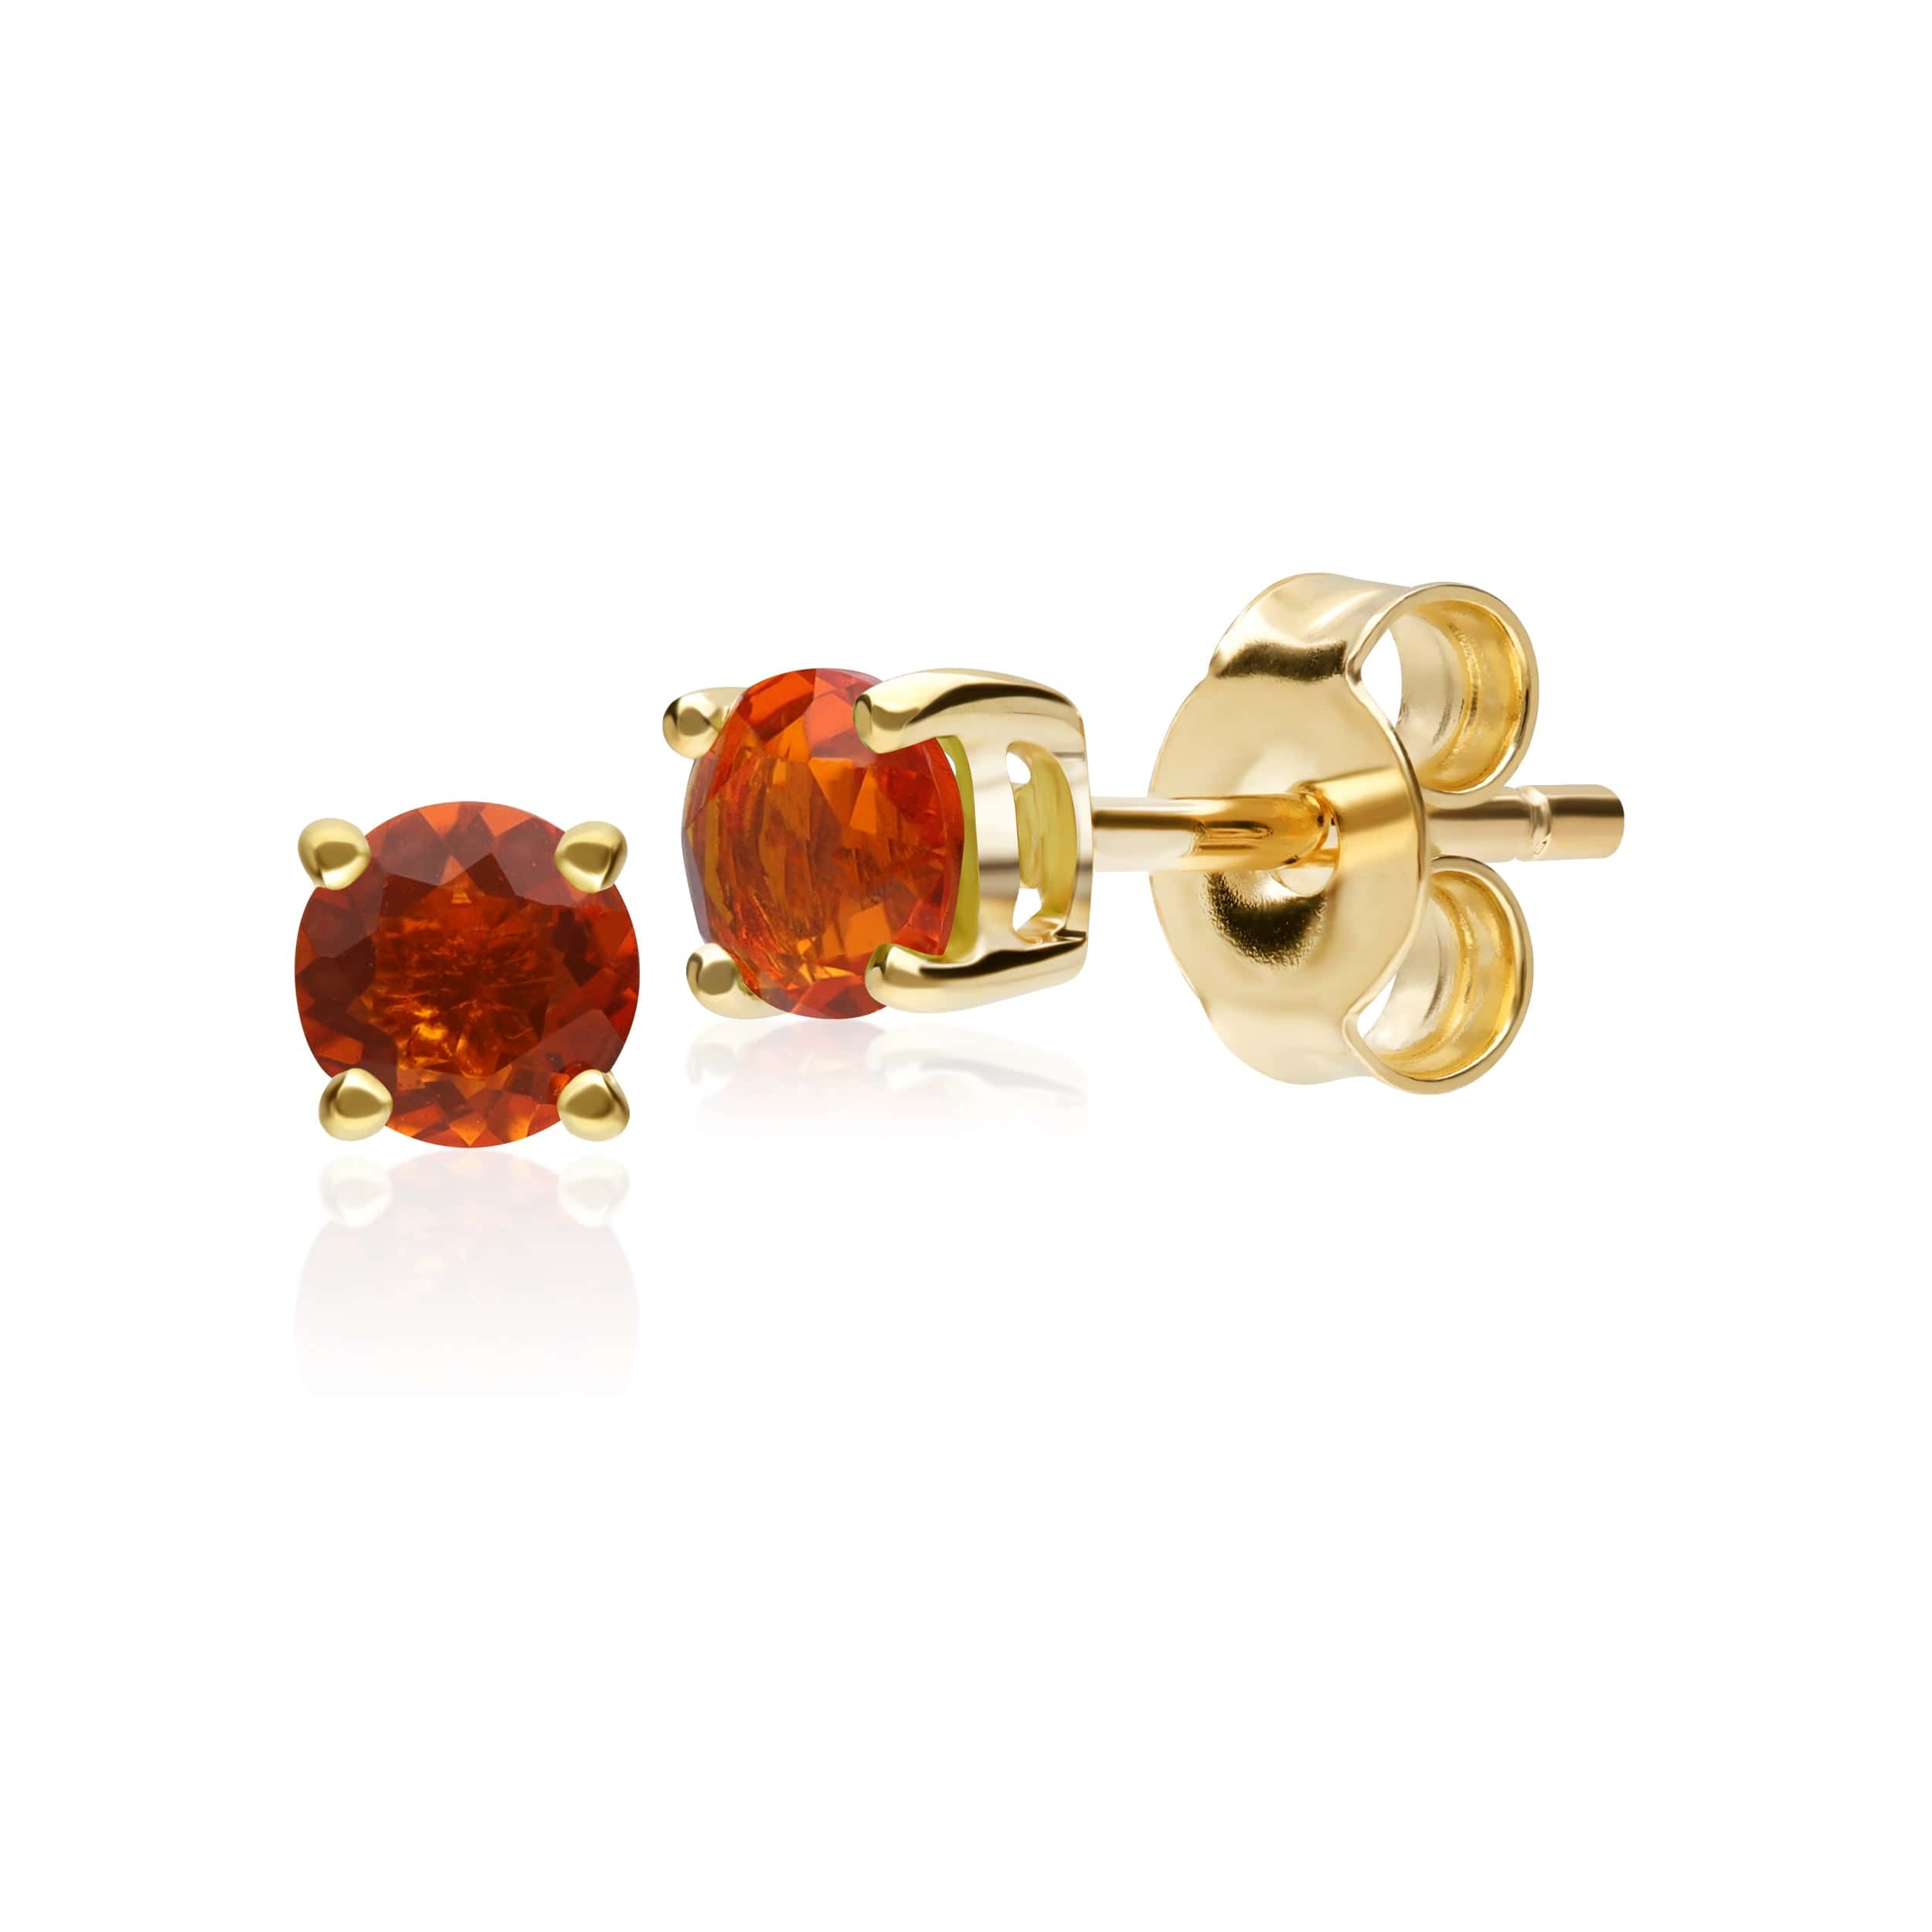 11561 Classic Round Fire Opal Stud Earrings in 9ct Yellow Gold 3.5mm 1